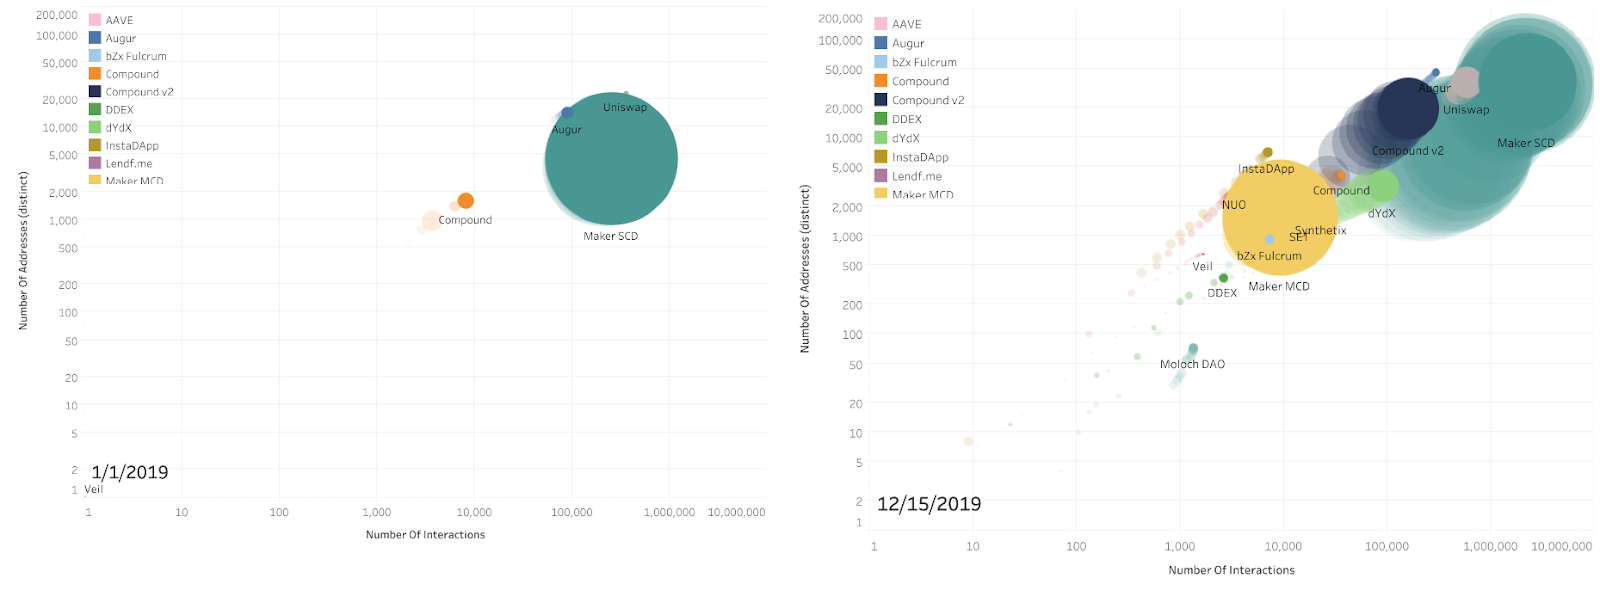 Difference between the number and the sizes of DeFi platforms on Ethereum at the beginning and at the end of 2019